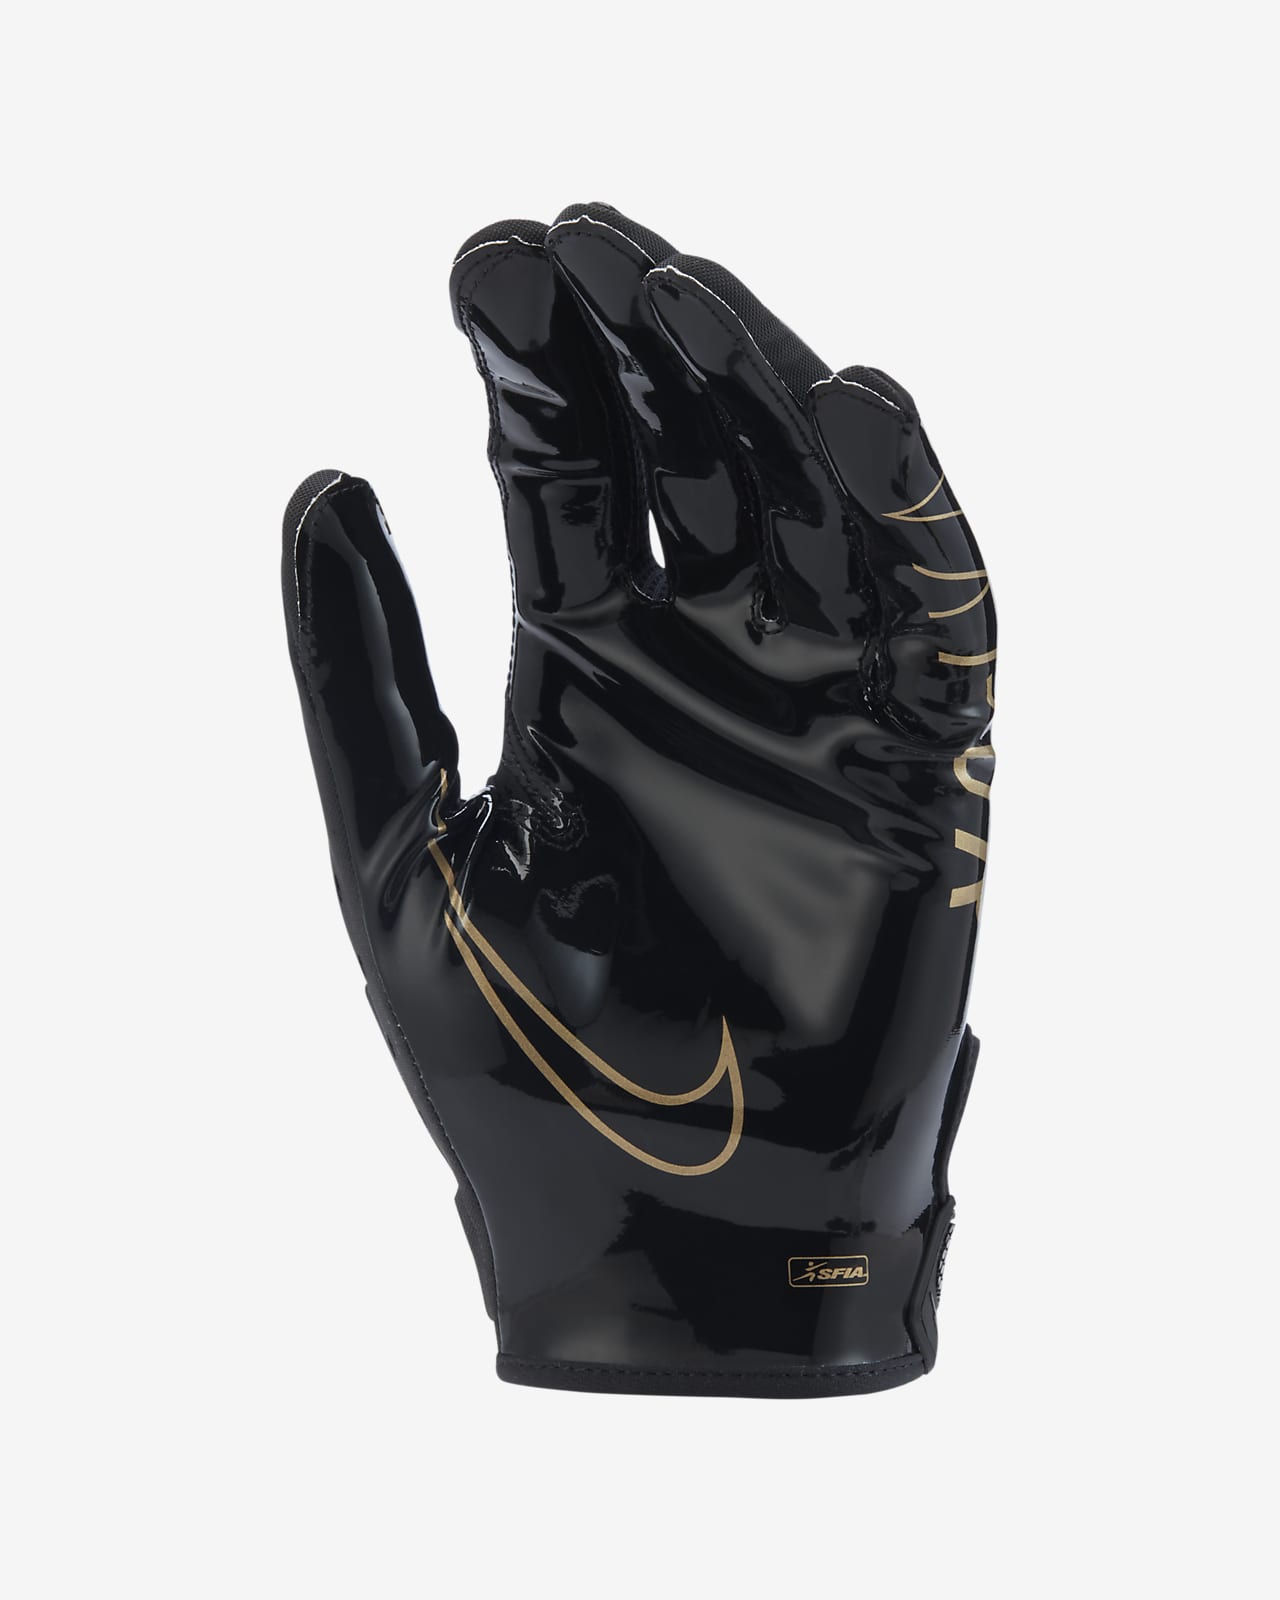 nike leather palm football gloves